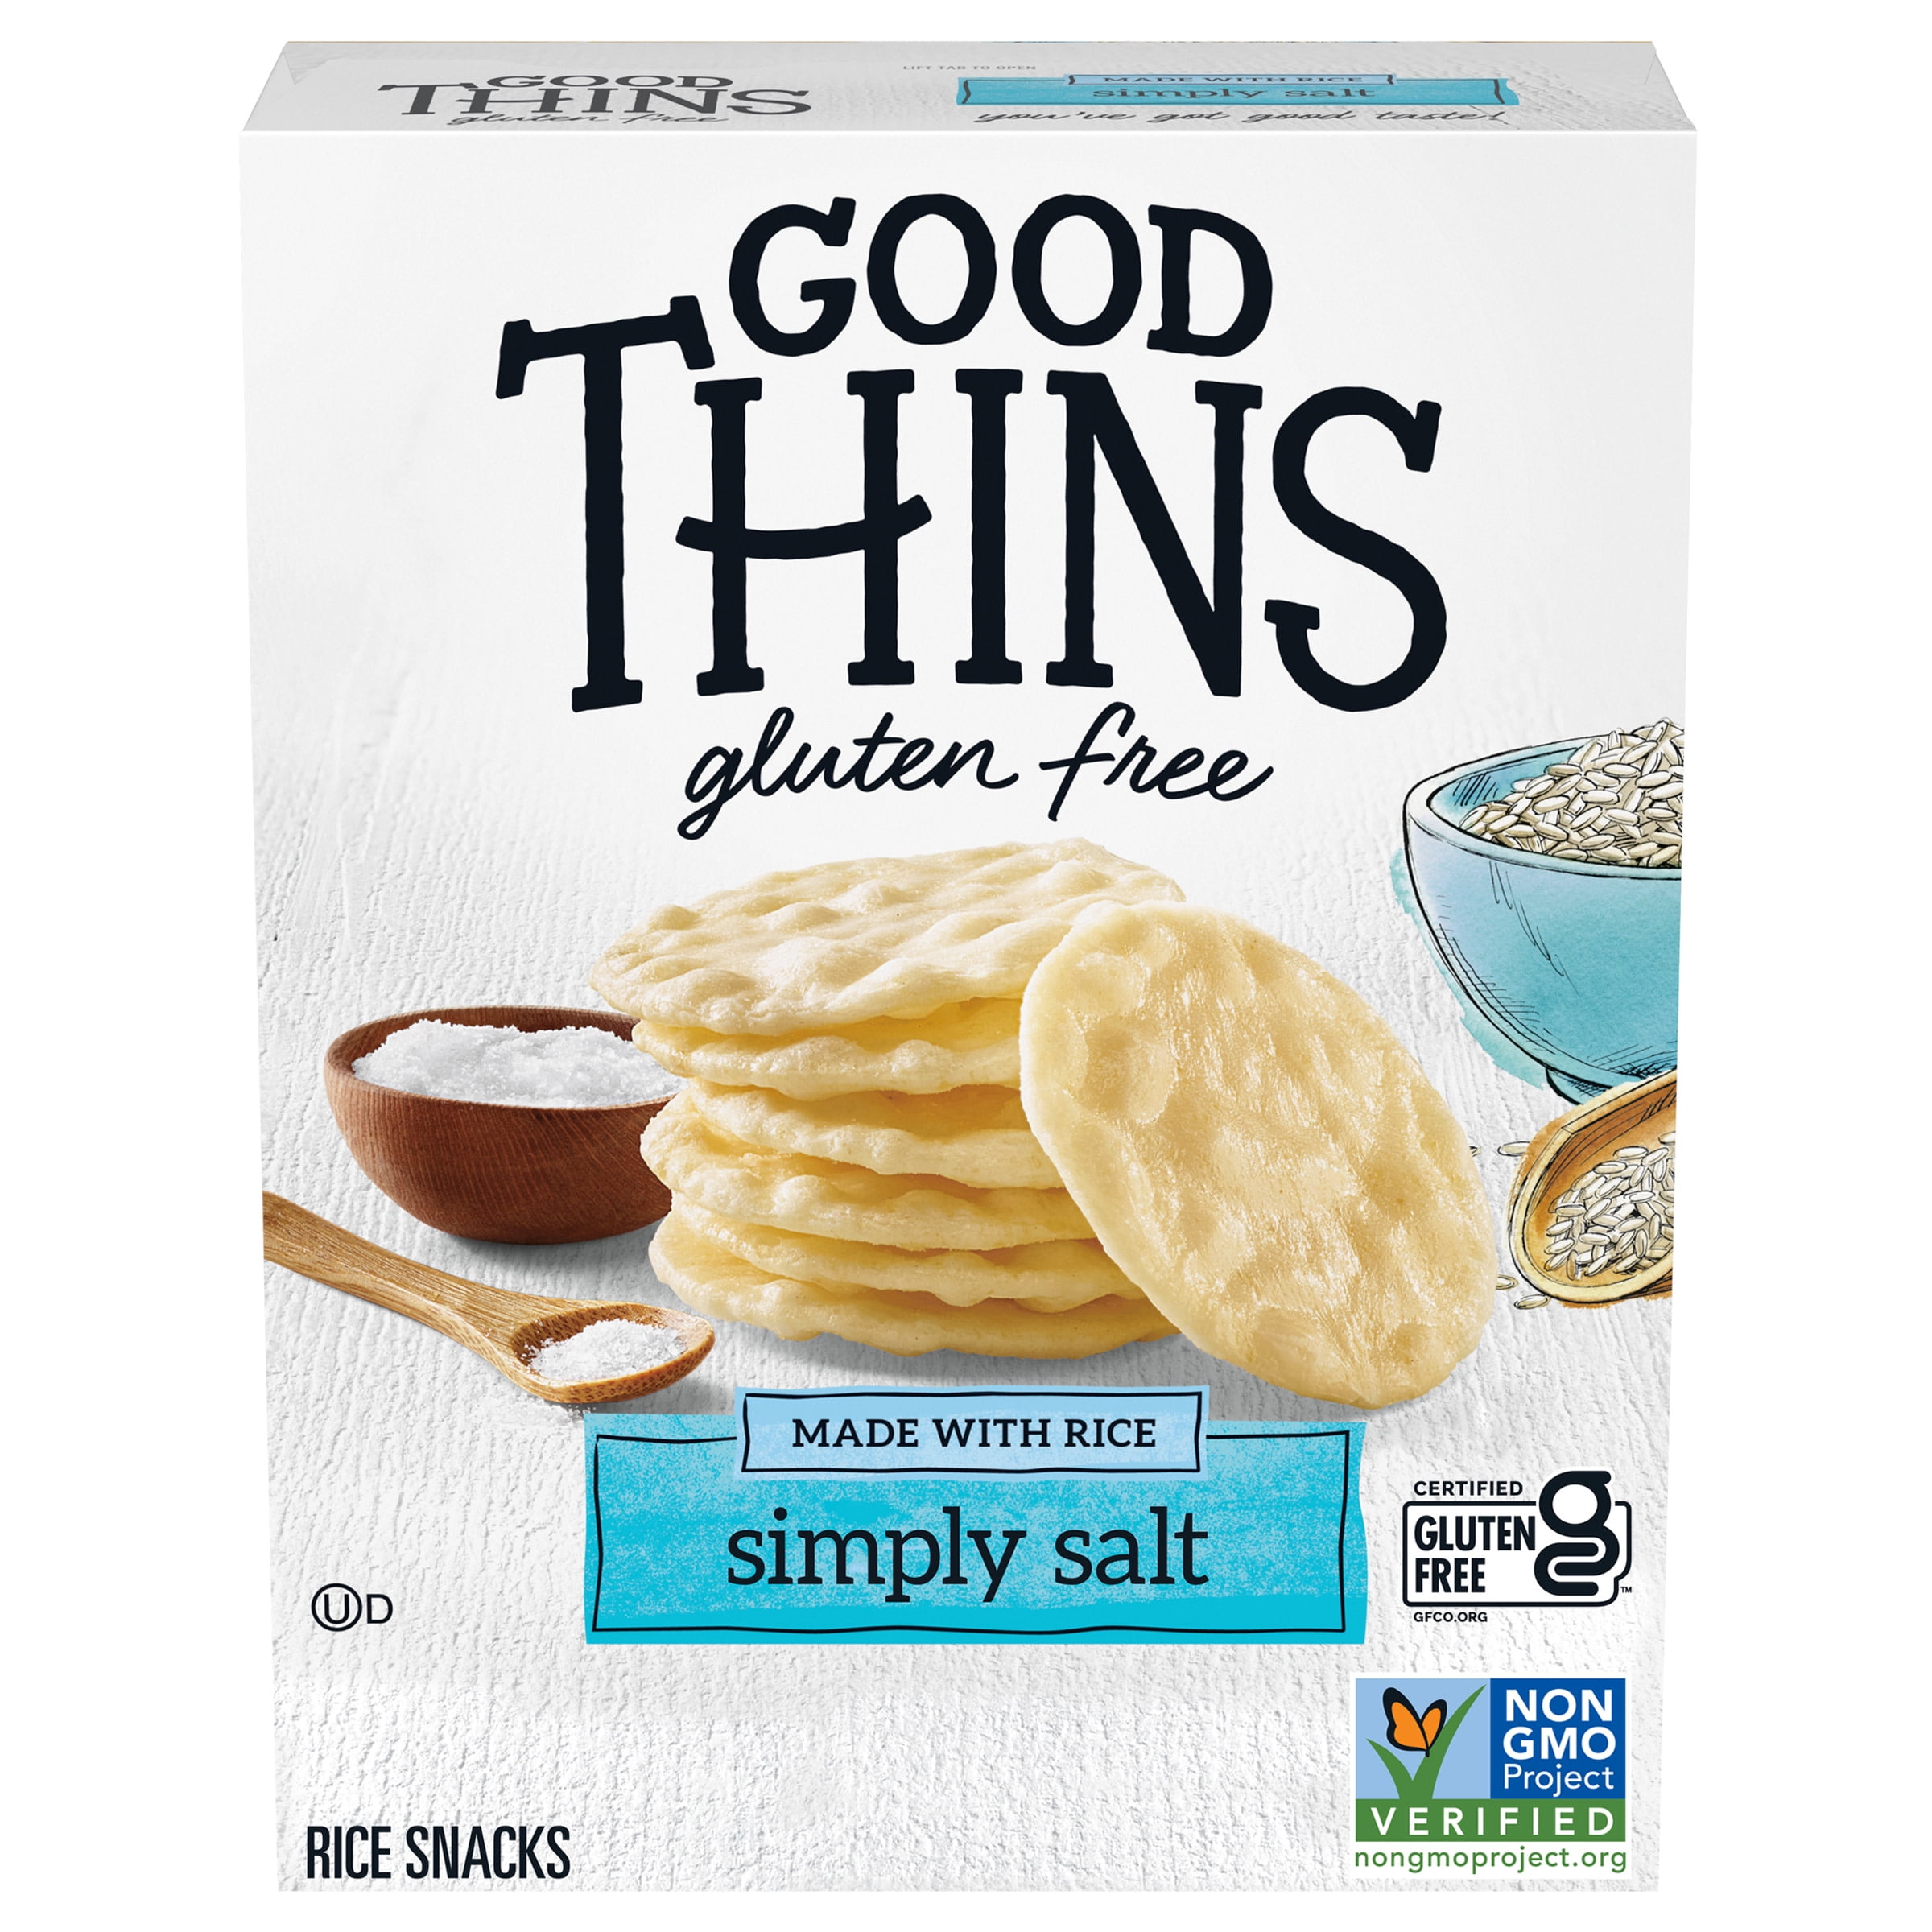 Good Thins Simply Salt Rice Snacks Gluten Free Crackers, 3.5 Ounce